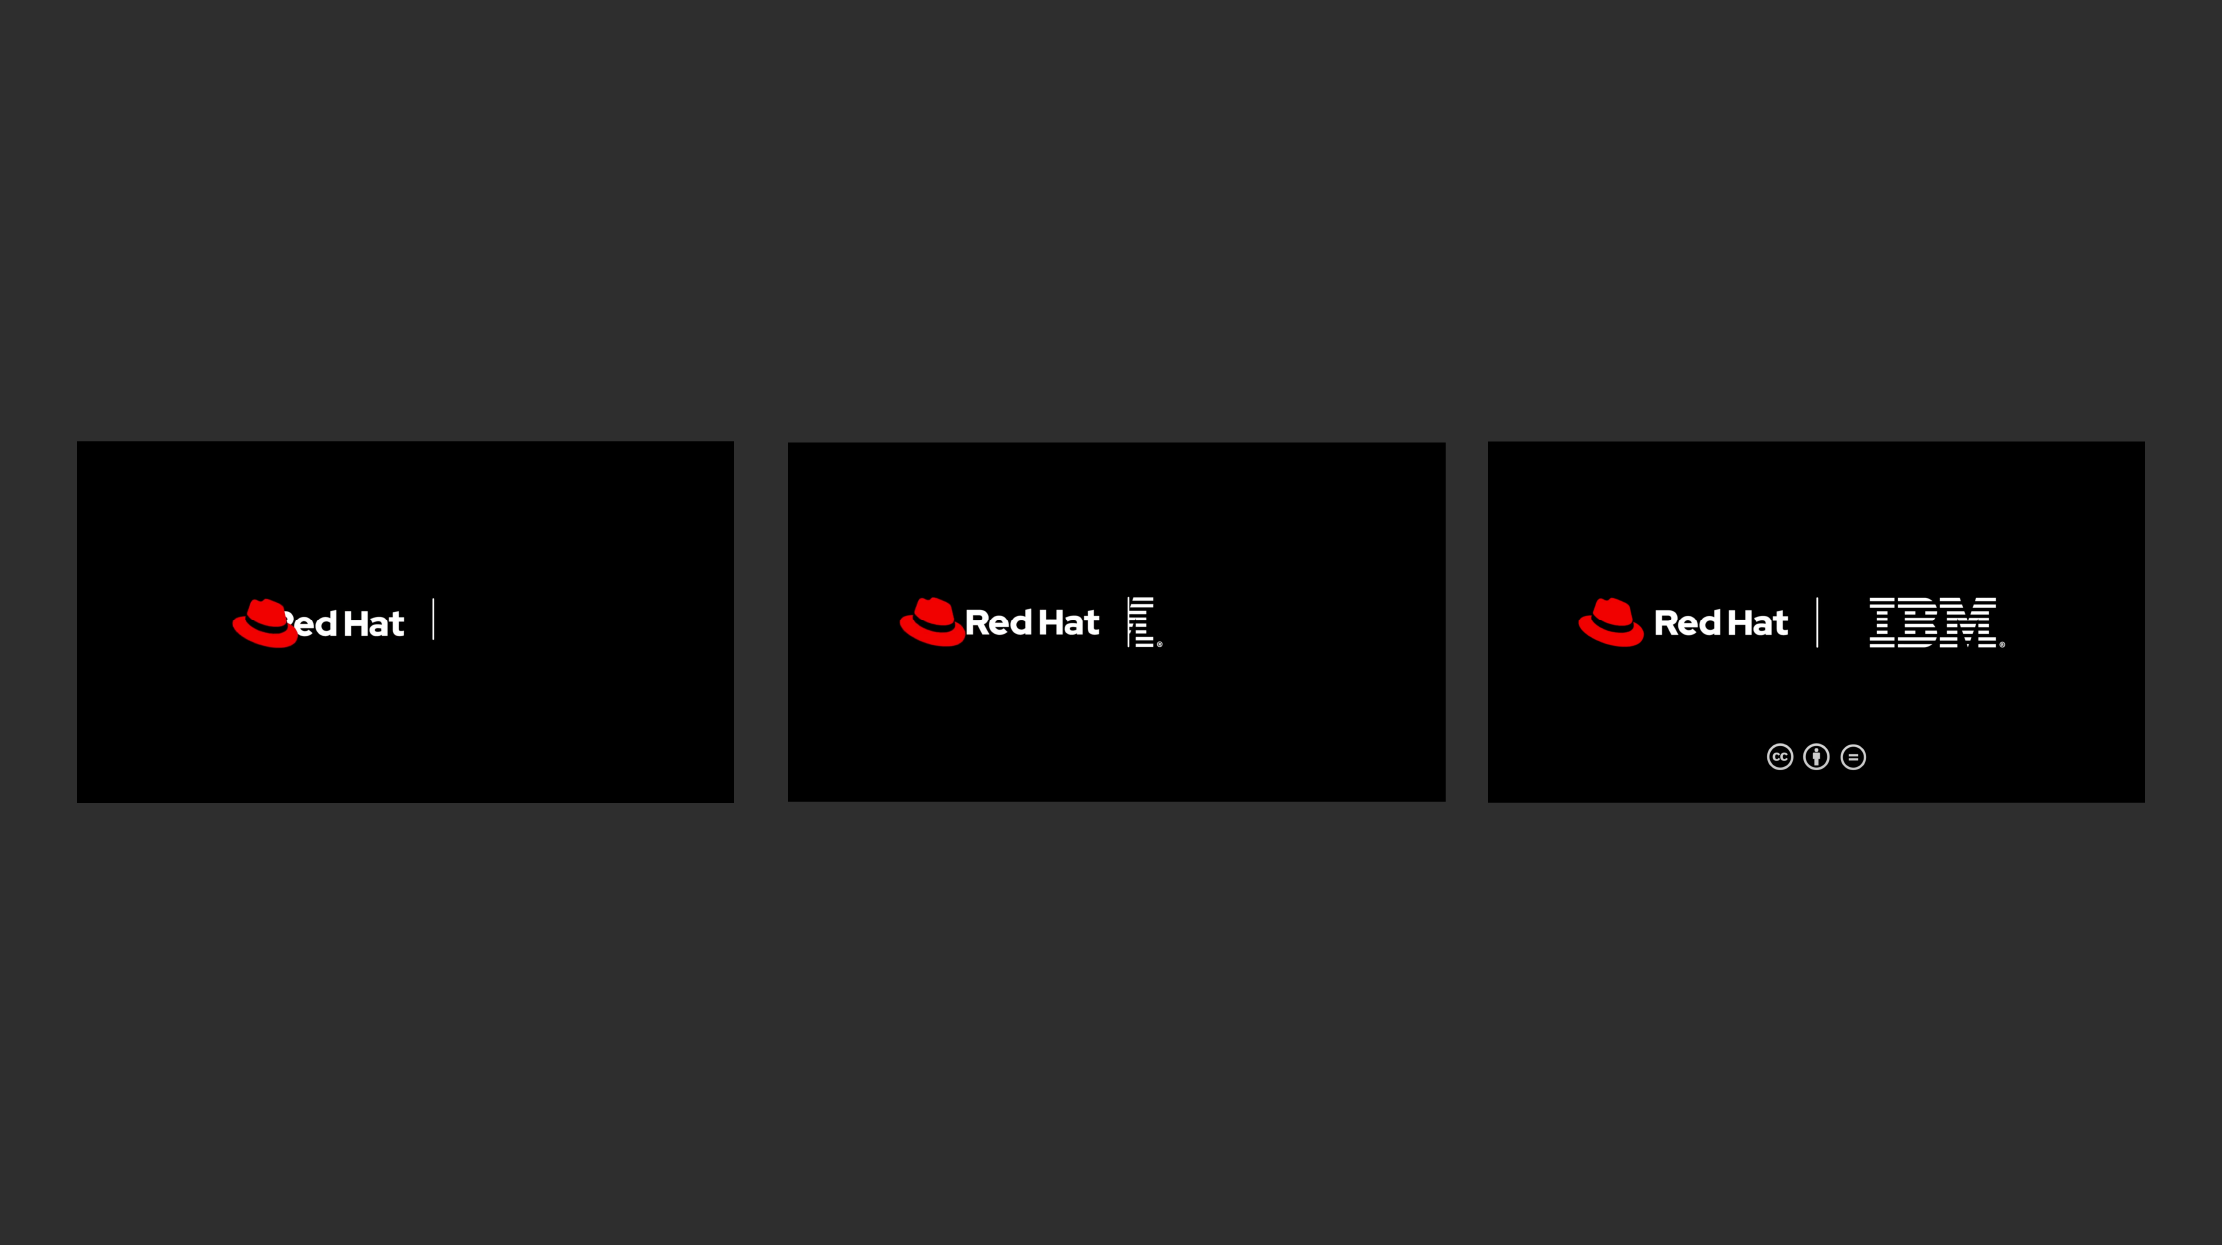 Red Hat and IBM co-branded video outro animation stills.